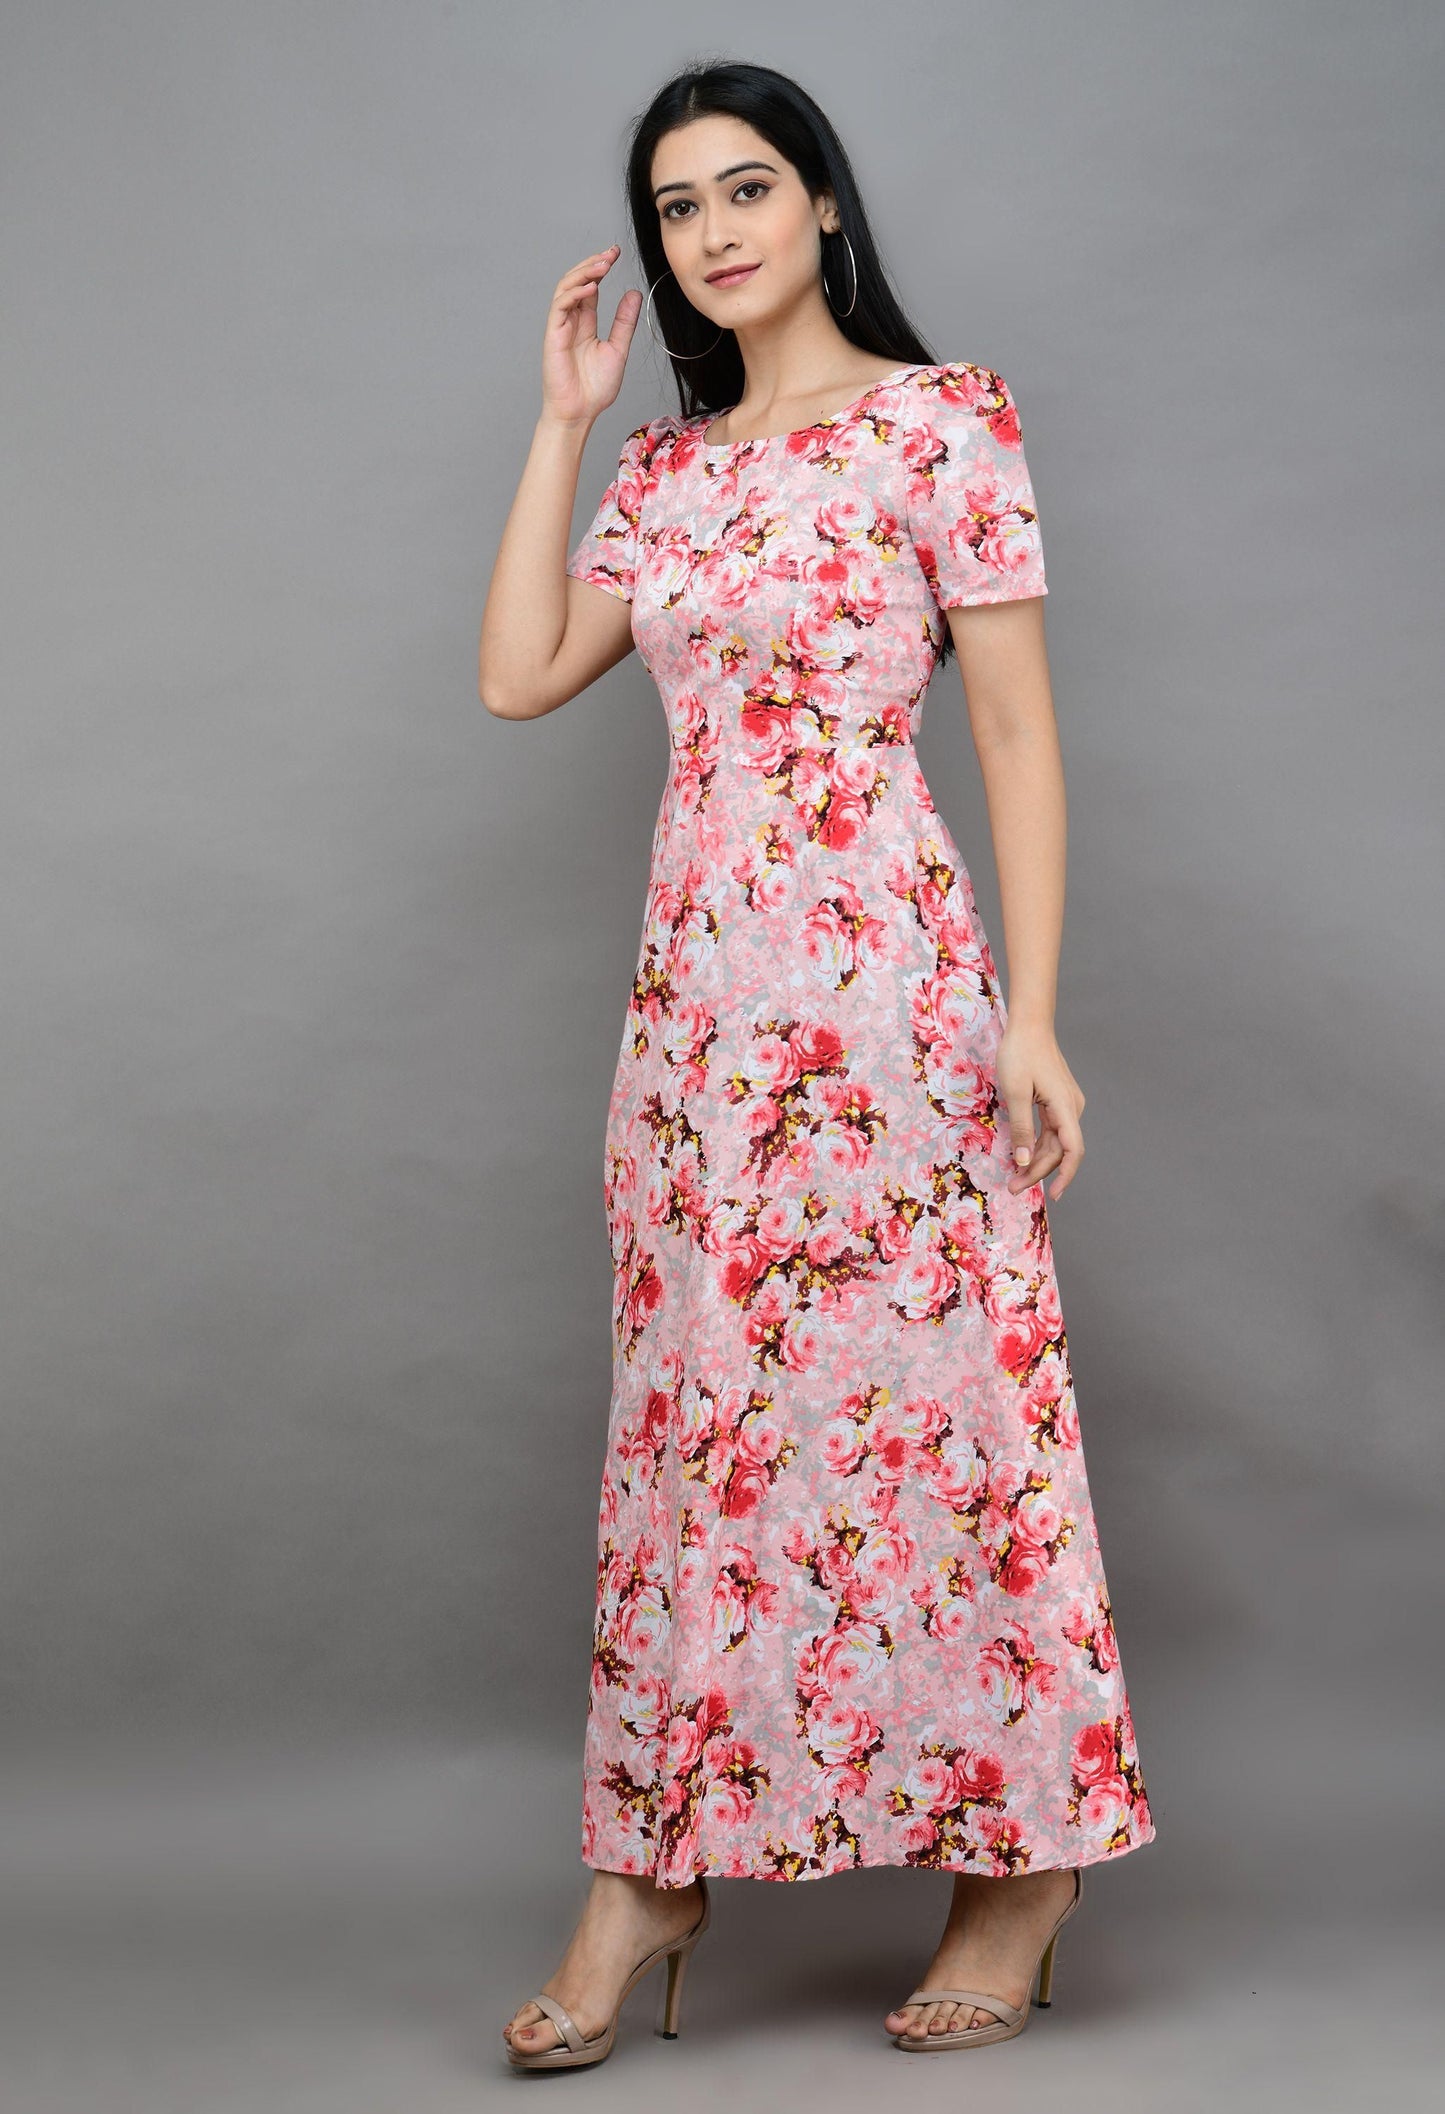 Women's Polyester Printed Maxi Dress